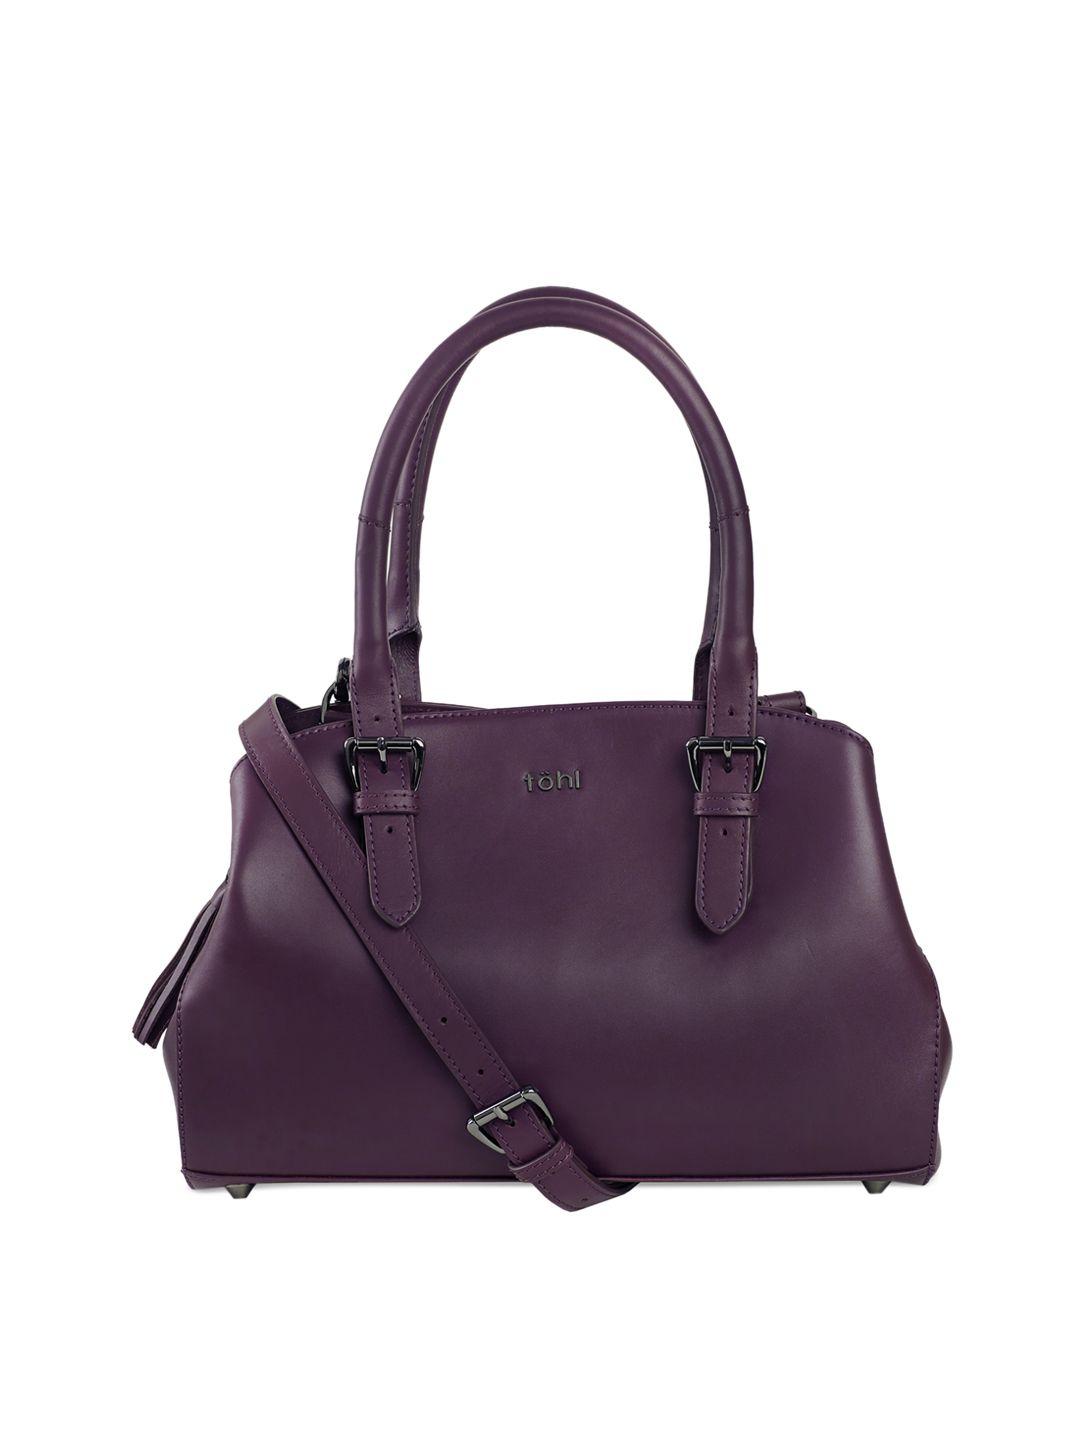 tohl purple solid leather handheld bag